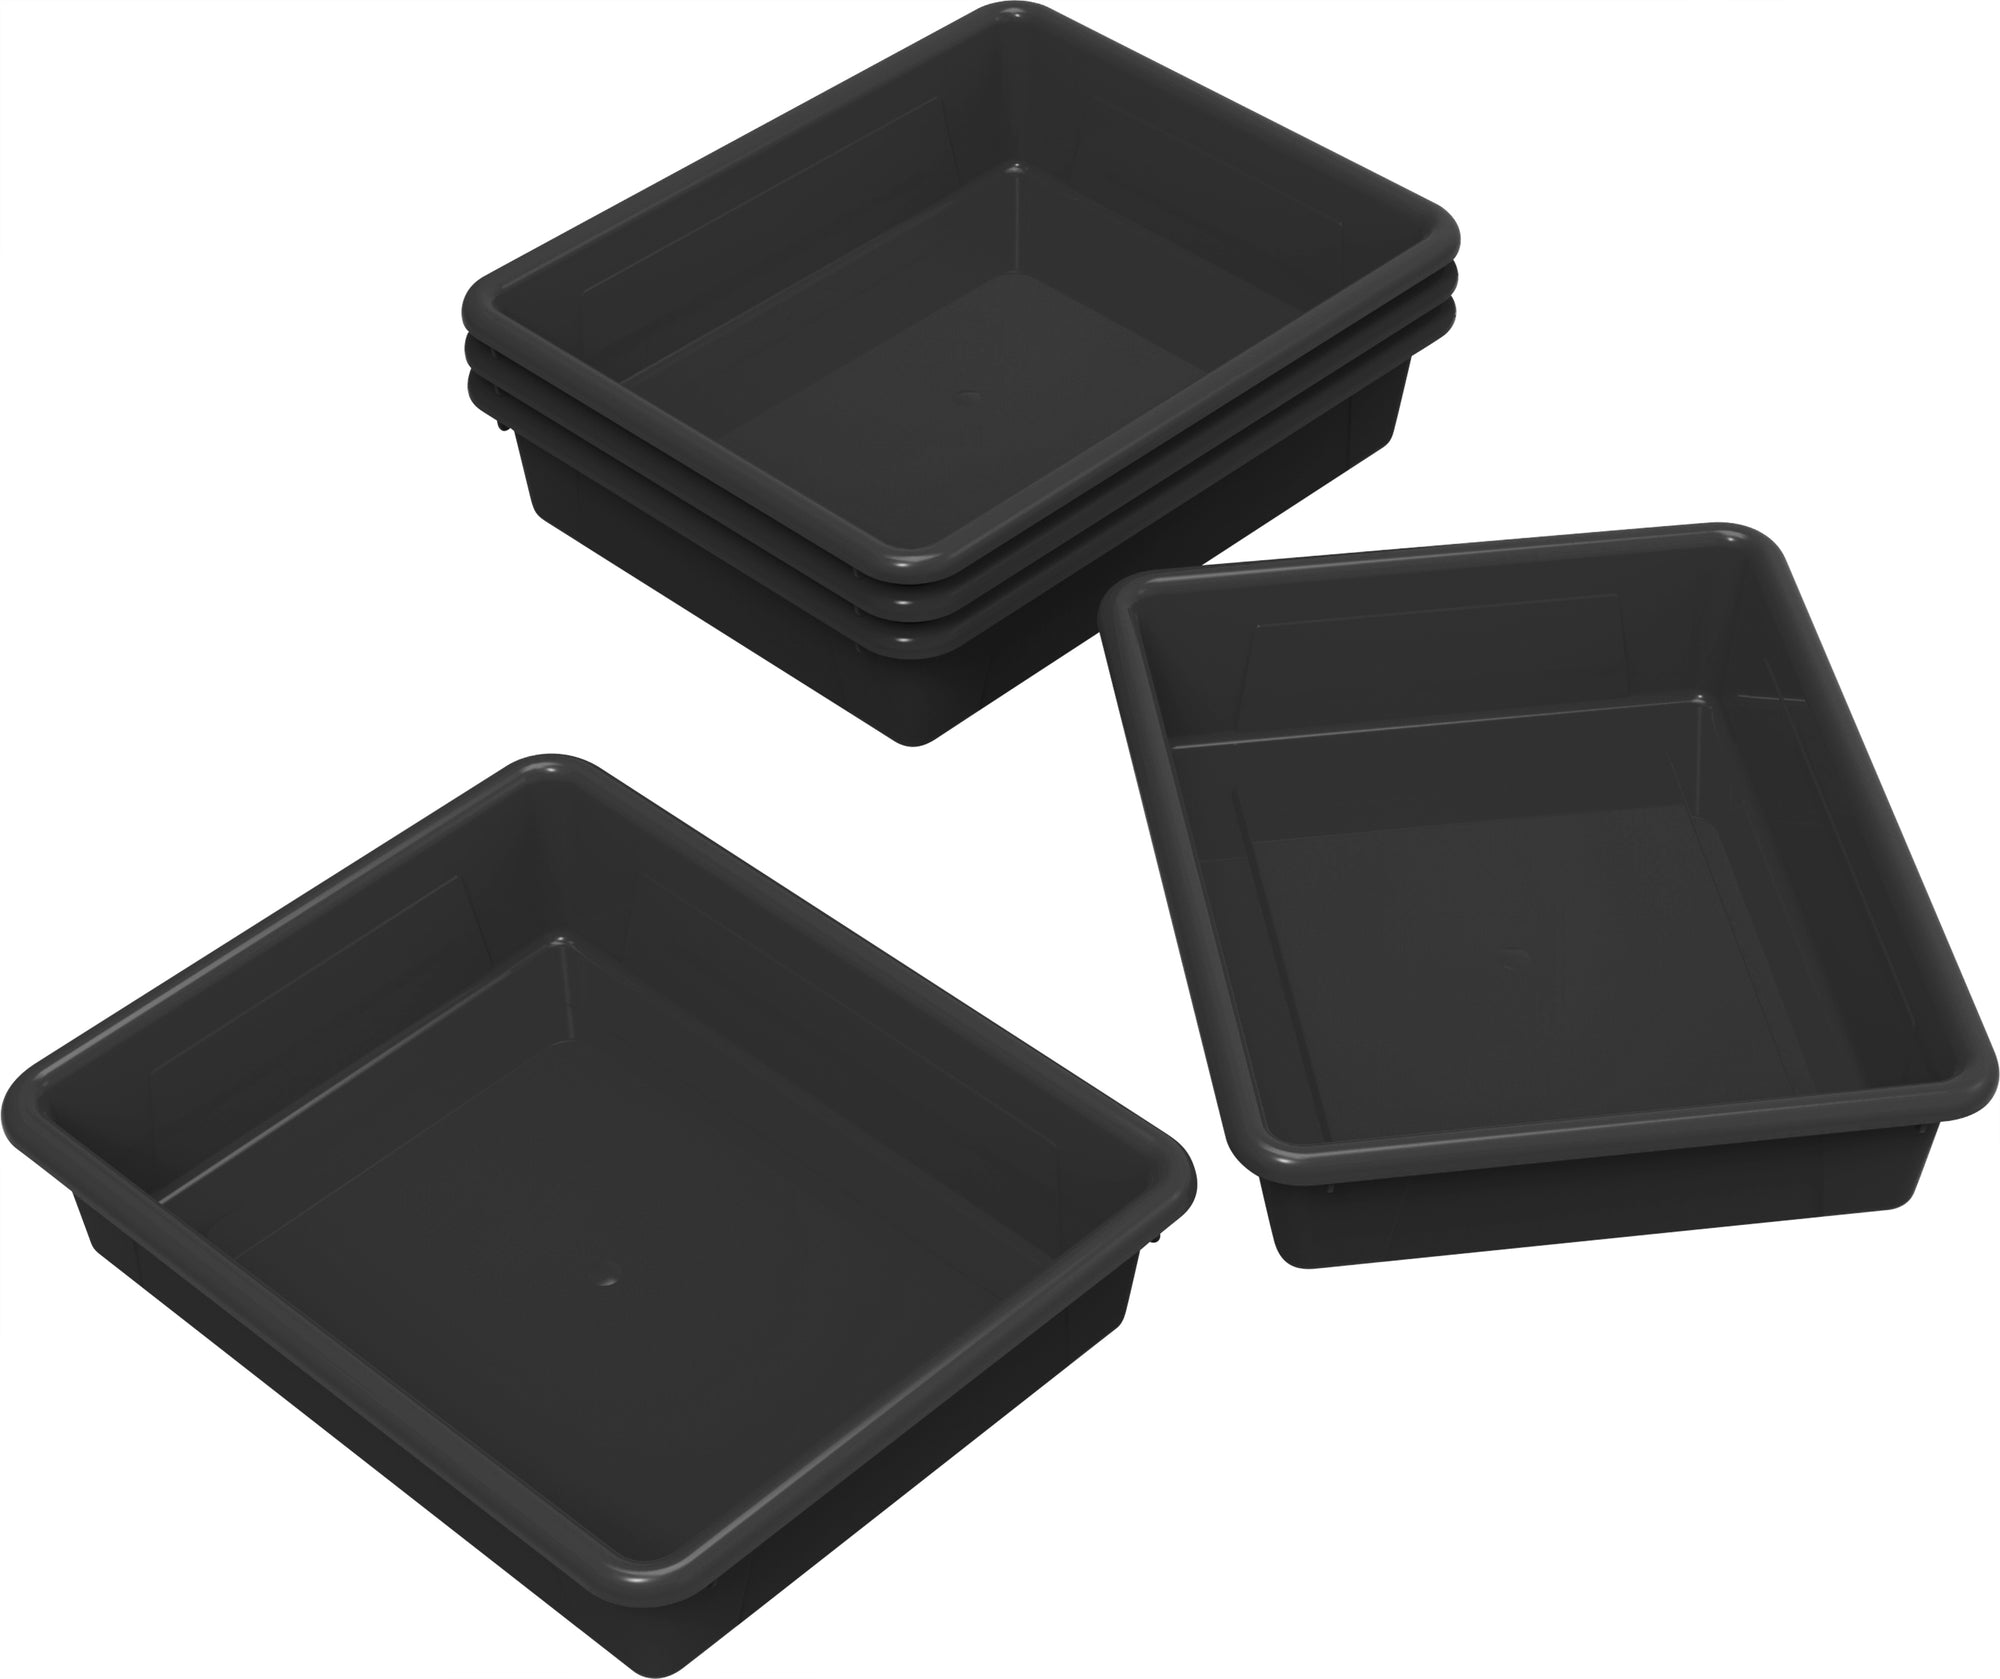 Storex Storage Tray, Letter Size, 10 x 13 x 3 Inches, Black, 5-Pack